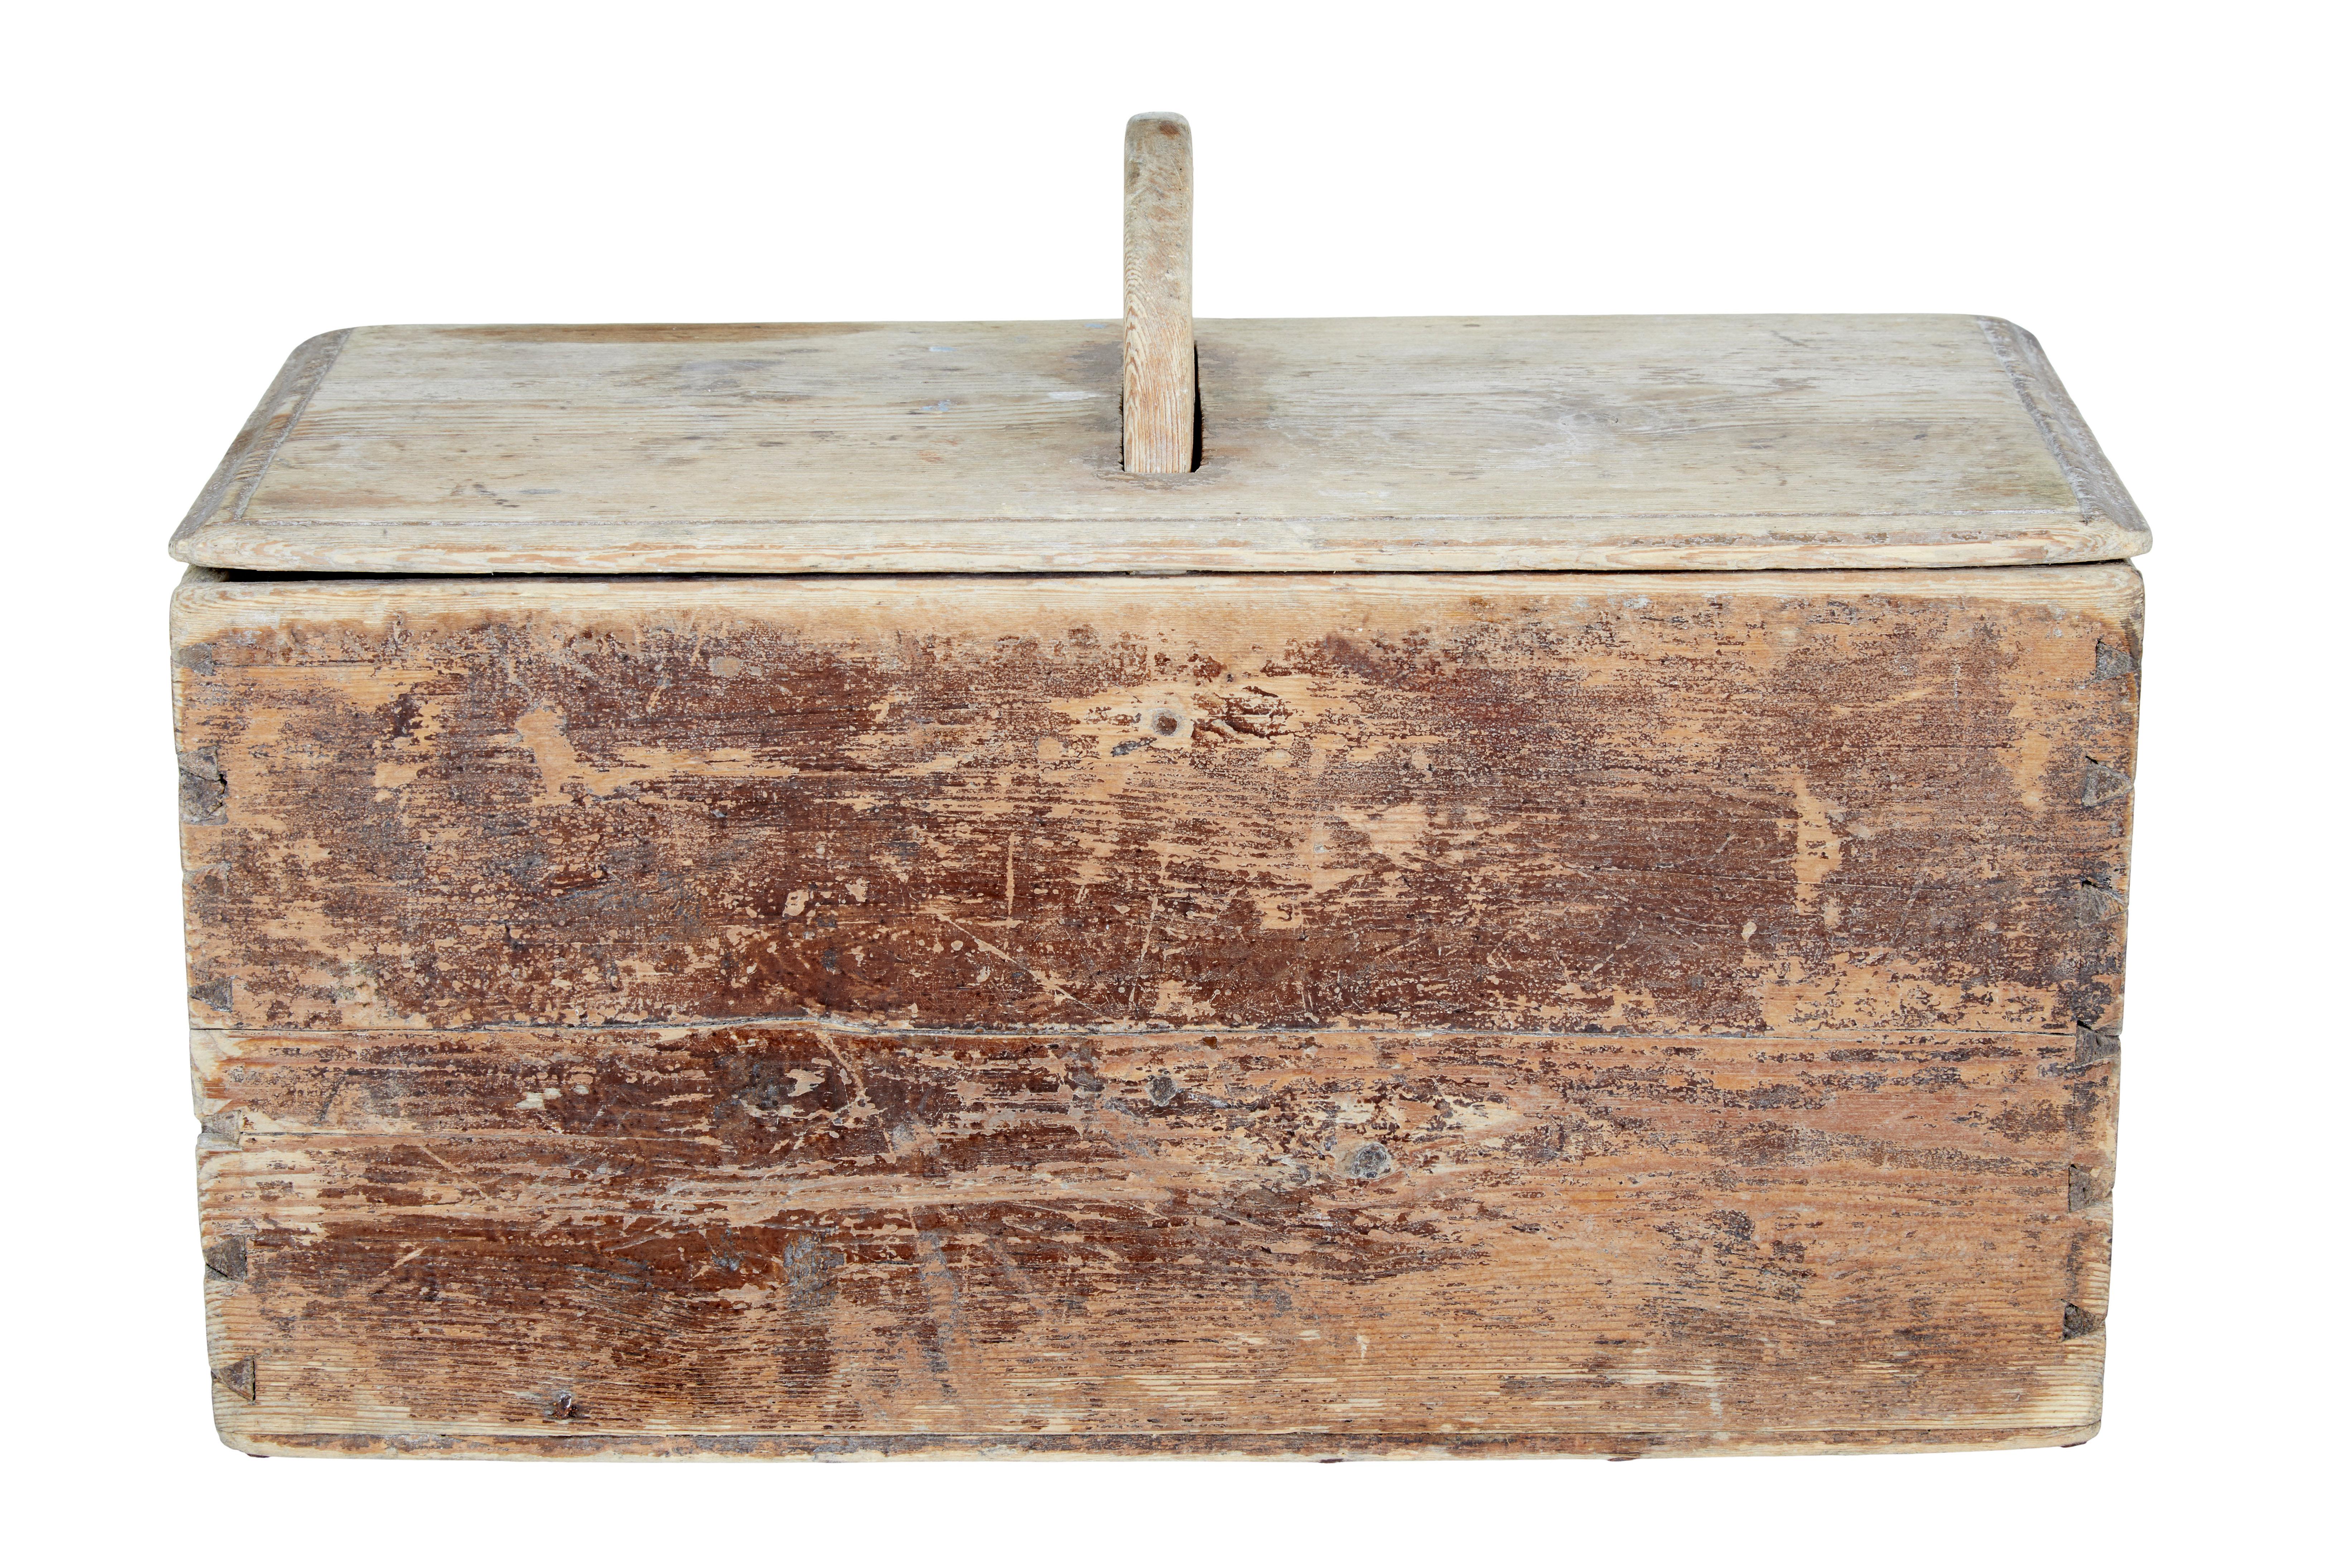 Early 19th century swedish pine bread storage box circa 1810.

Fine quality piece of early 19th century practical design, utilising the handle to act as a central partition as well. We believe this to be from bread storage but it could of had a